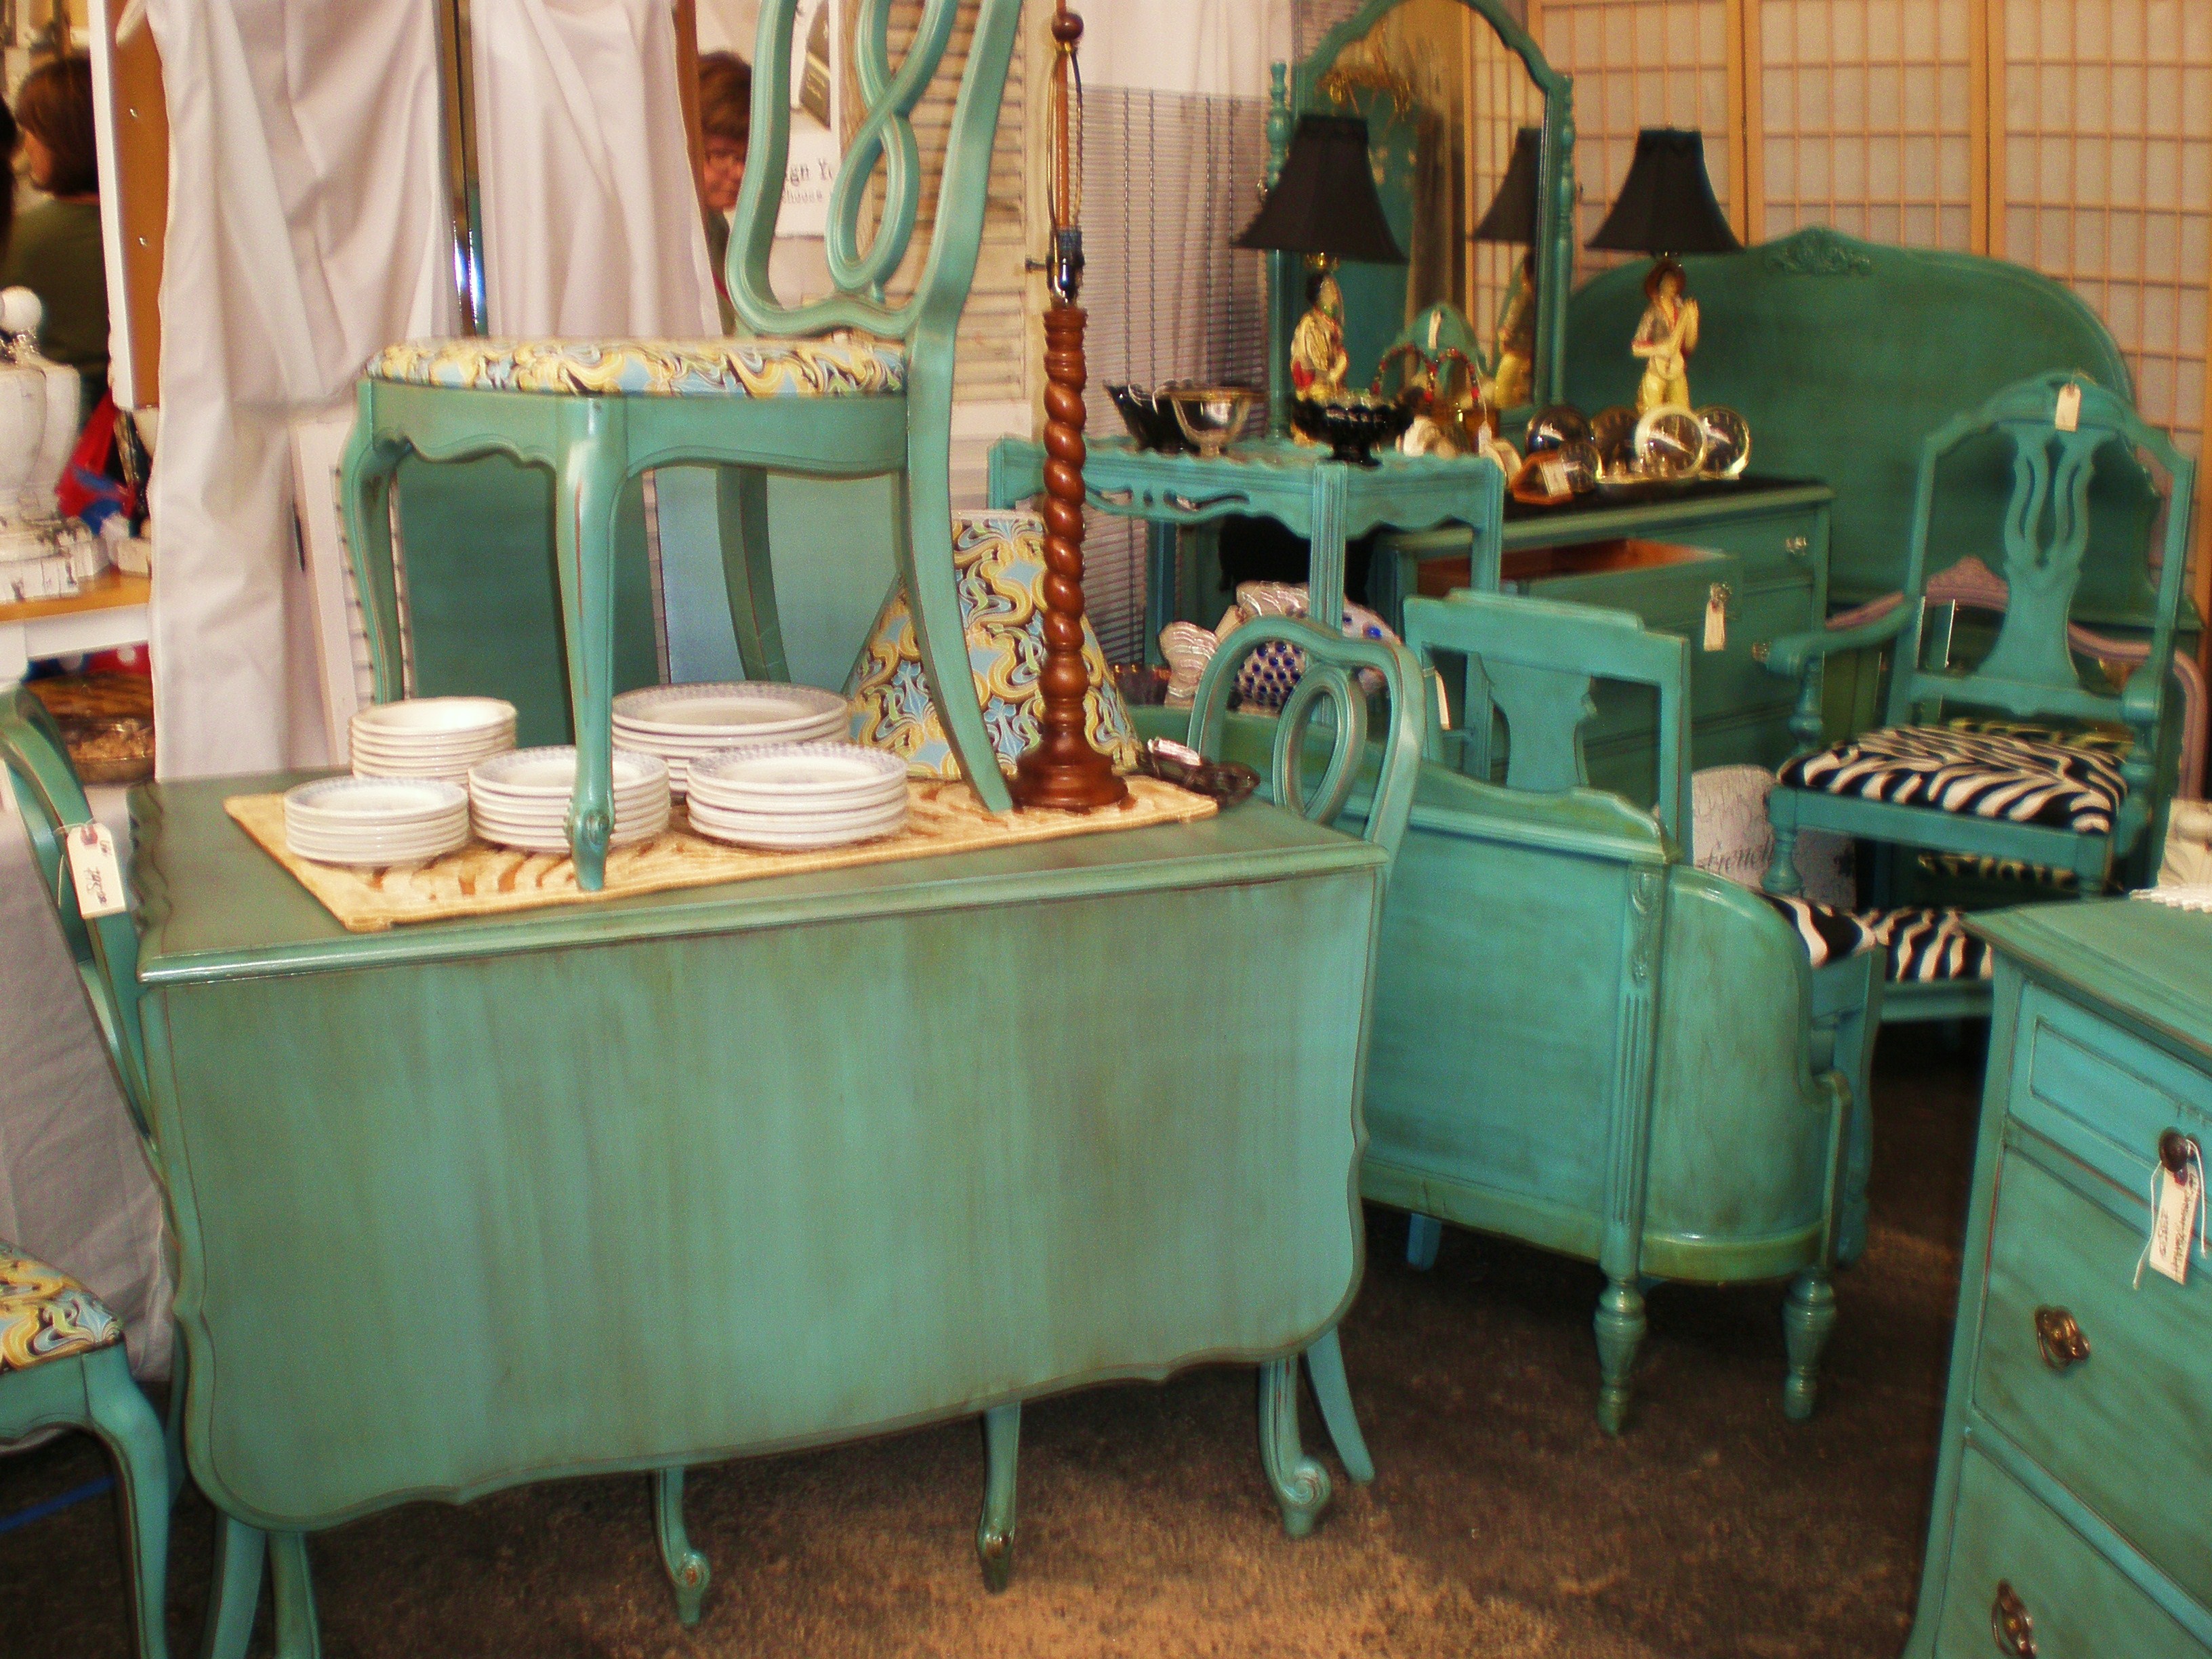 SHOP FOR ANTIQUE PAINTED FURNITURE ONLINE - COMPARE PRICES, READ